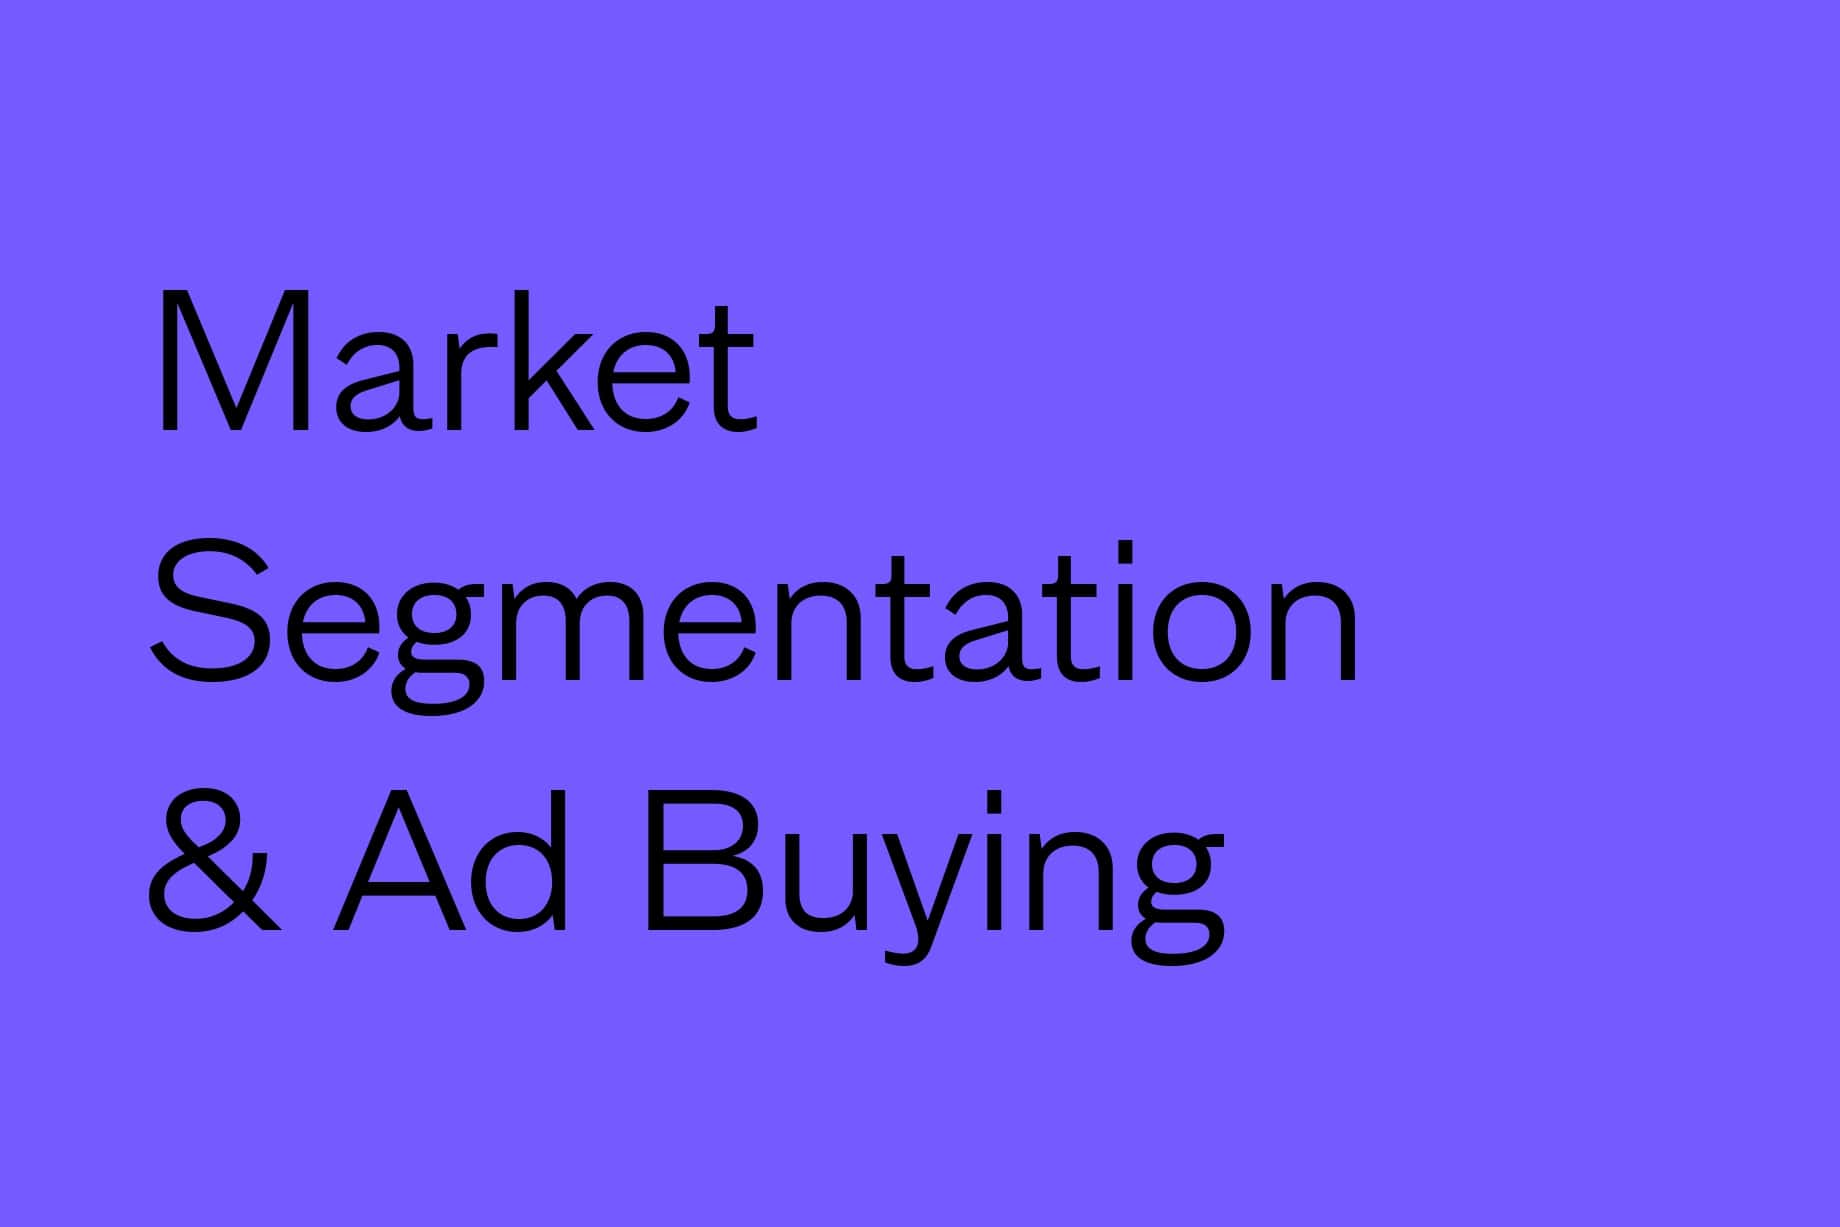 How Market Segmentation Can Improve Your Ad Buying Effectiveness